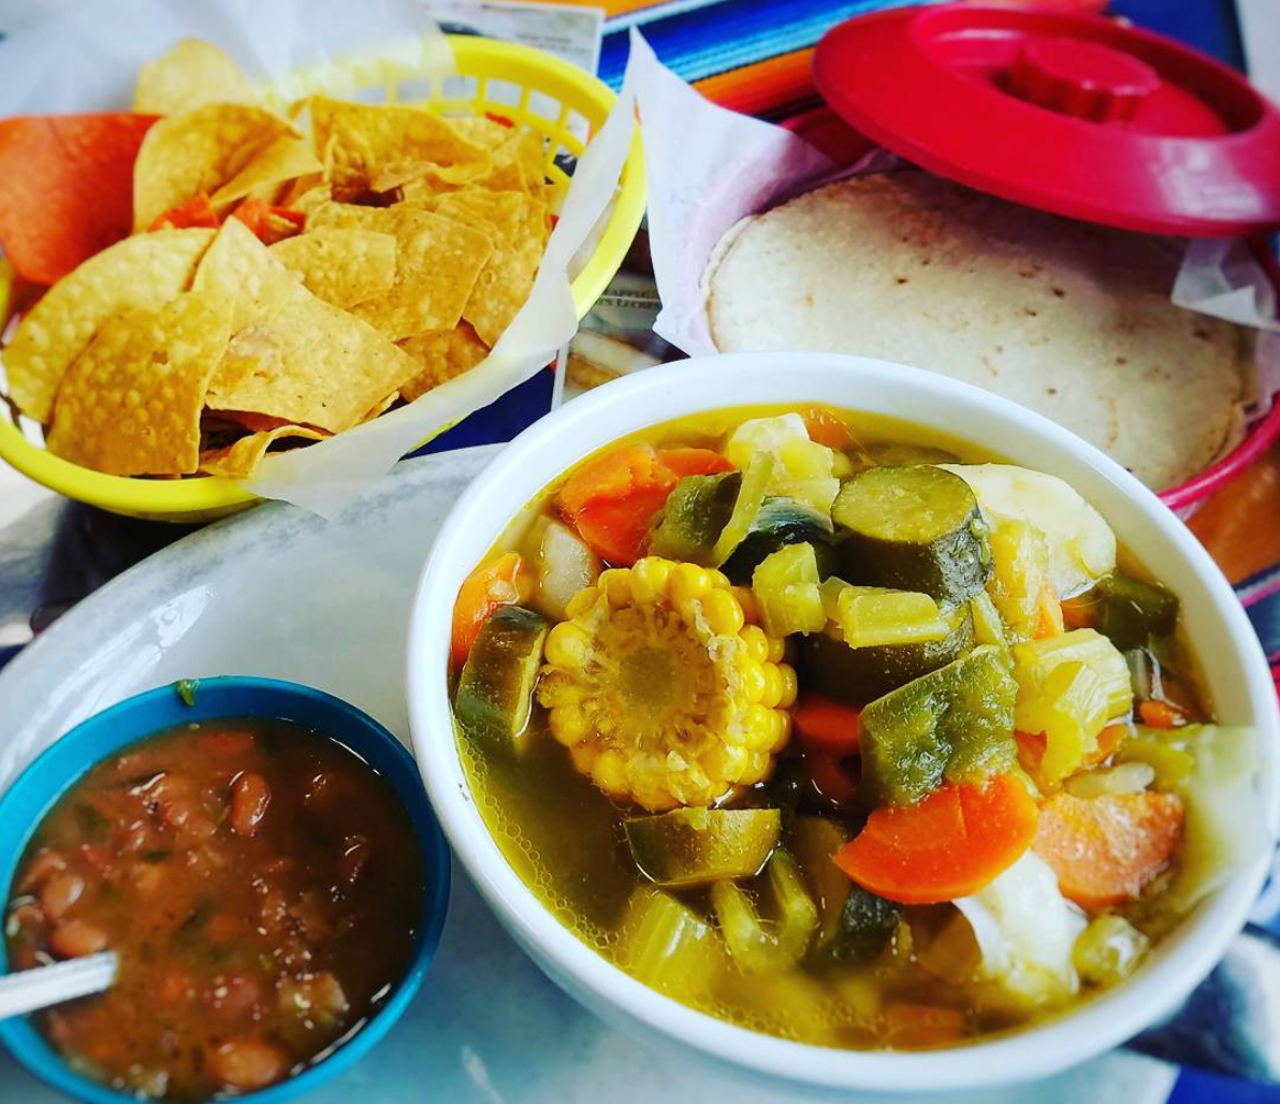 Jaime’s Mexican Restaurant
2530 S. WW White Road, (210) 236-8494
Come to Jaime’s Mexican Restaurant for the caldo, then come again because you’re a regular. Like most of their clientele, you’ll keep coming back because the food is so good.
Photo via Instagram / sanantonionightout